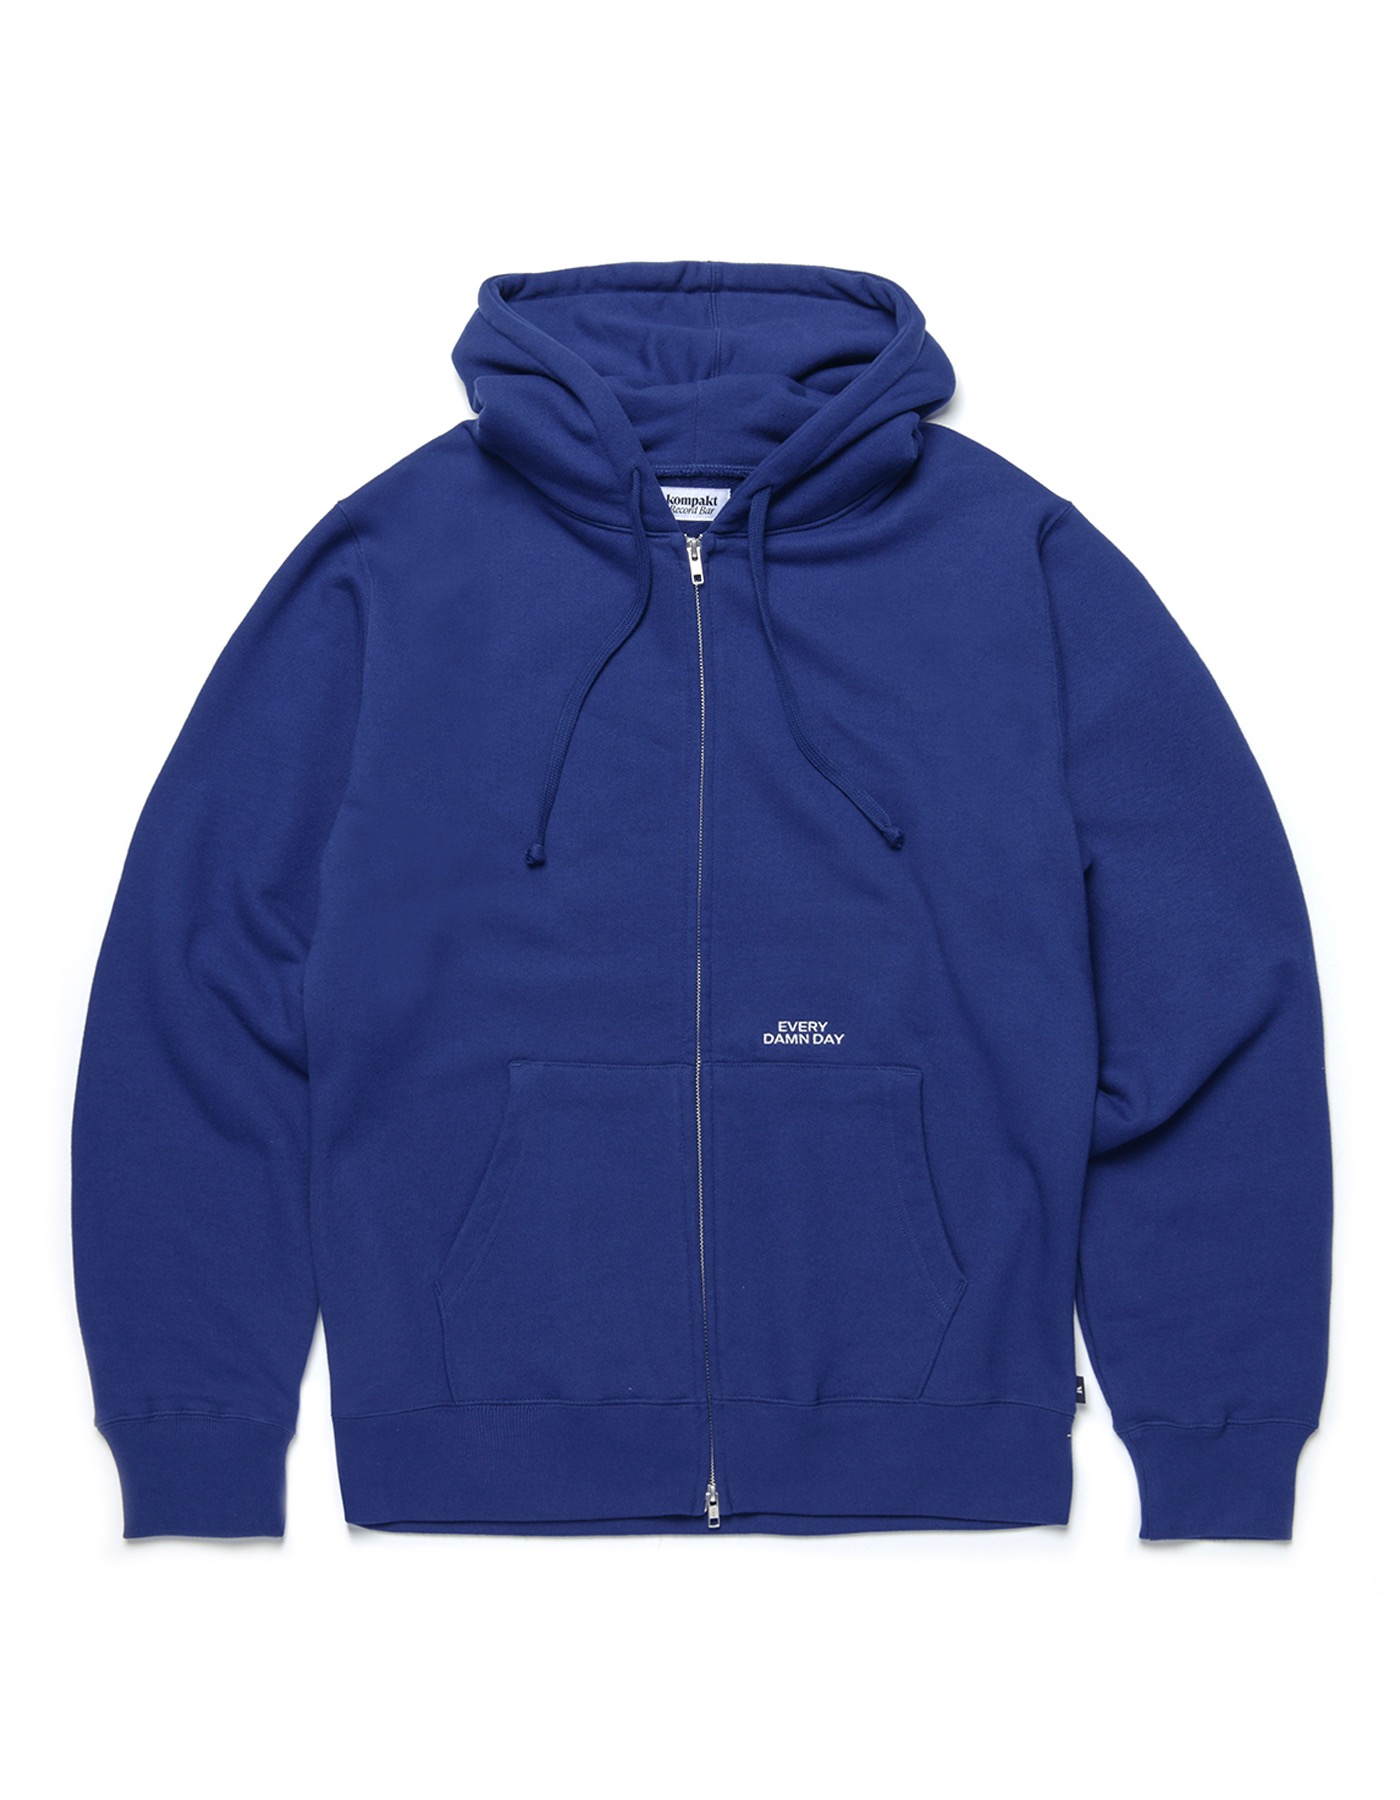 The World is Invited Zip-up Hoodie - Navy